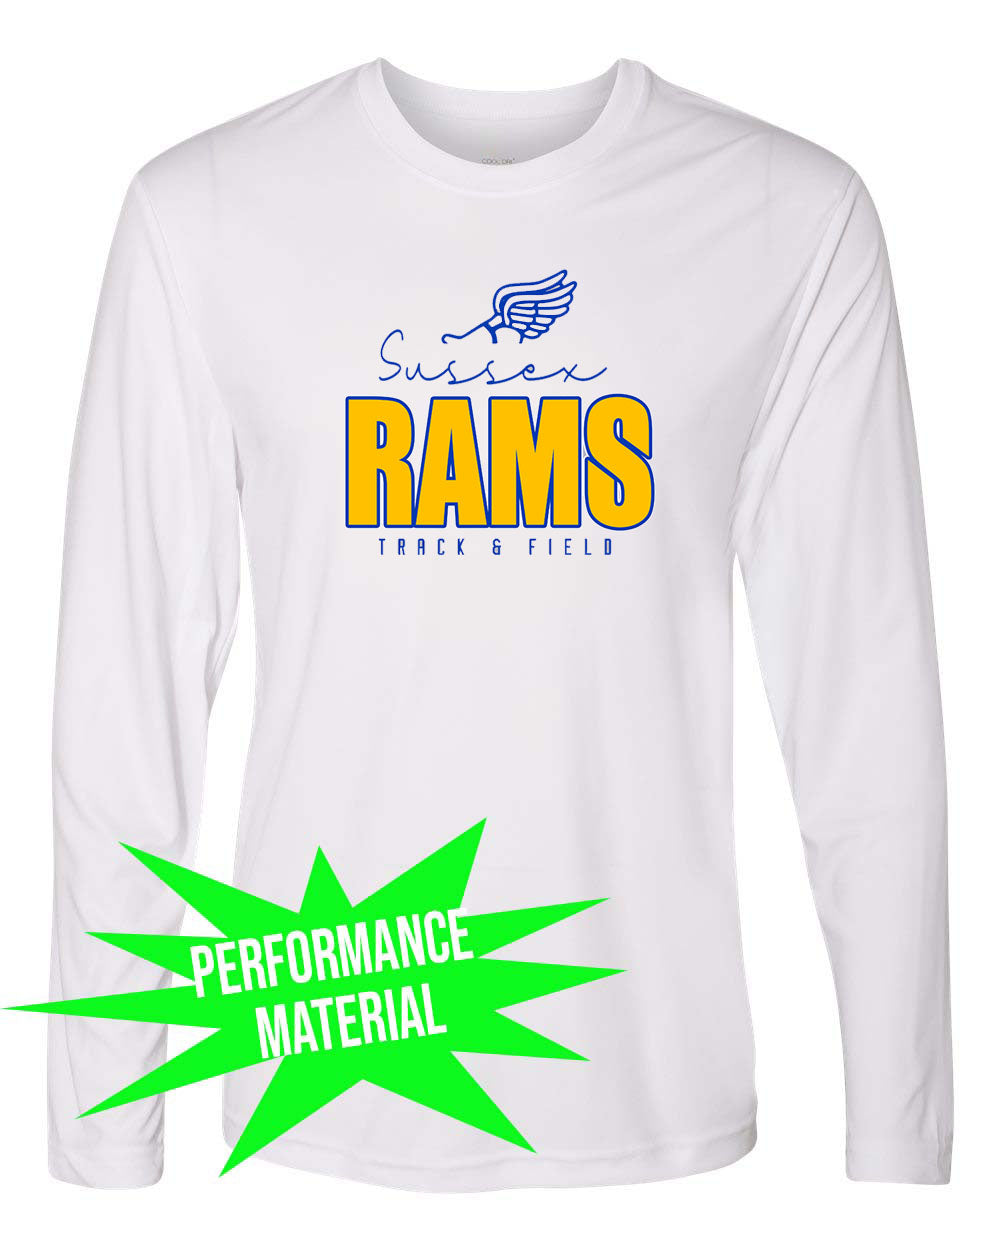 Sussex Rams Track Performance Material Long Sleeve Shirt Design 4